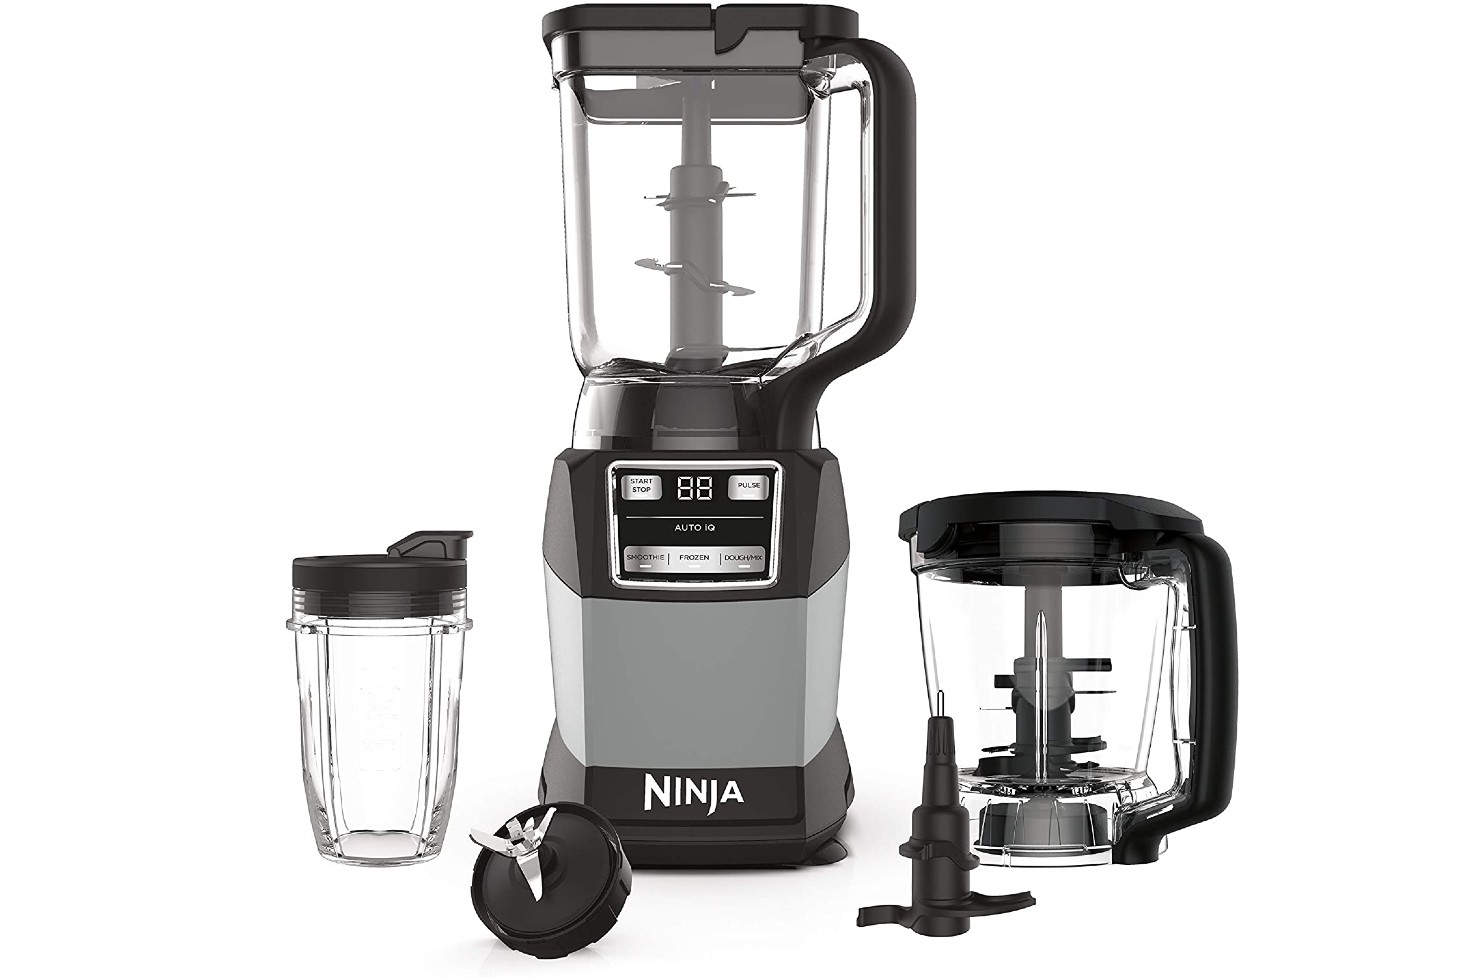 The 9 Best Ninja Blenders On the Market Right Now - The Manual